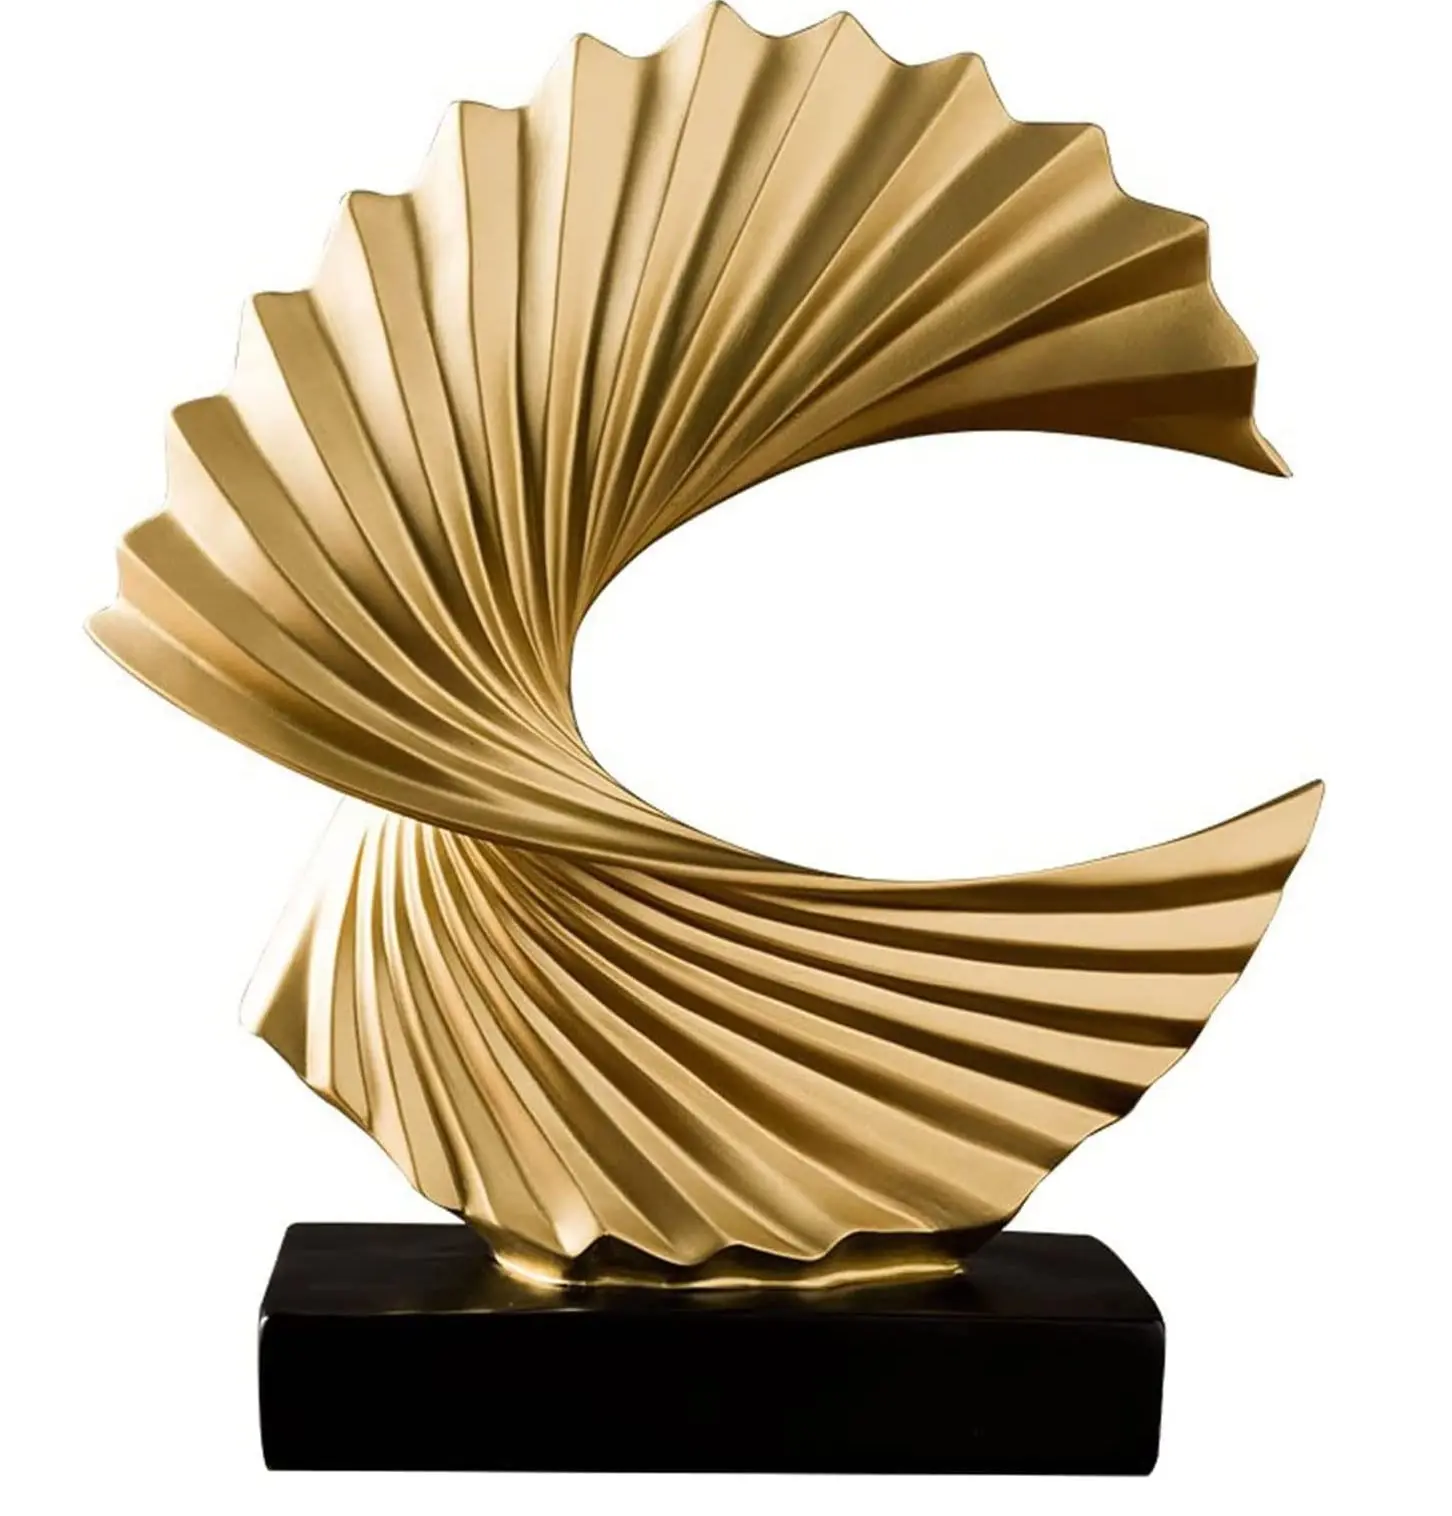 Luxury Abstract Design Home Decorative Metal Crafts Golden Elegant & Most Demanding Long Size Tabletop Sculpture For Home Decor